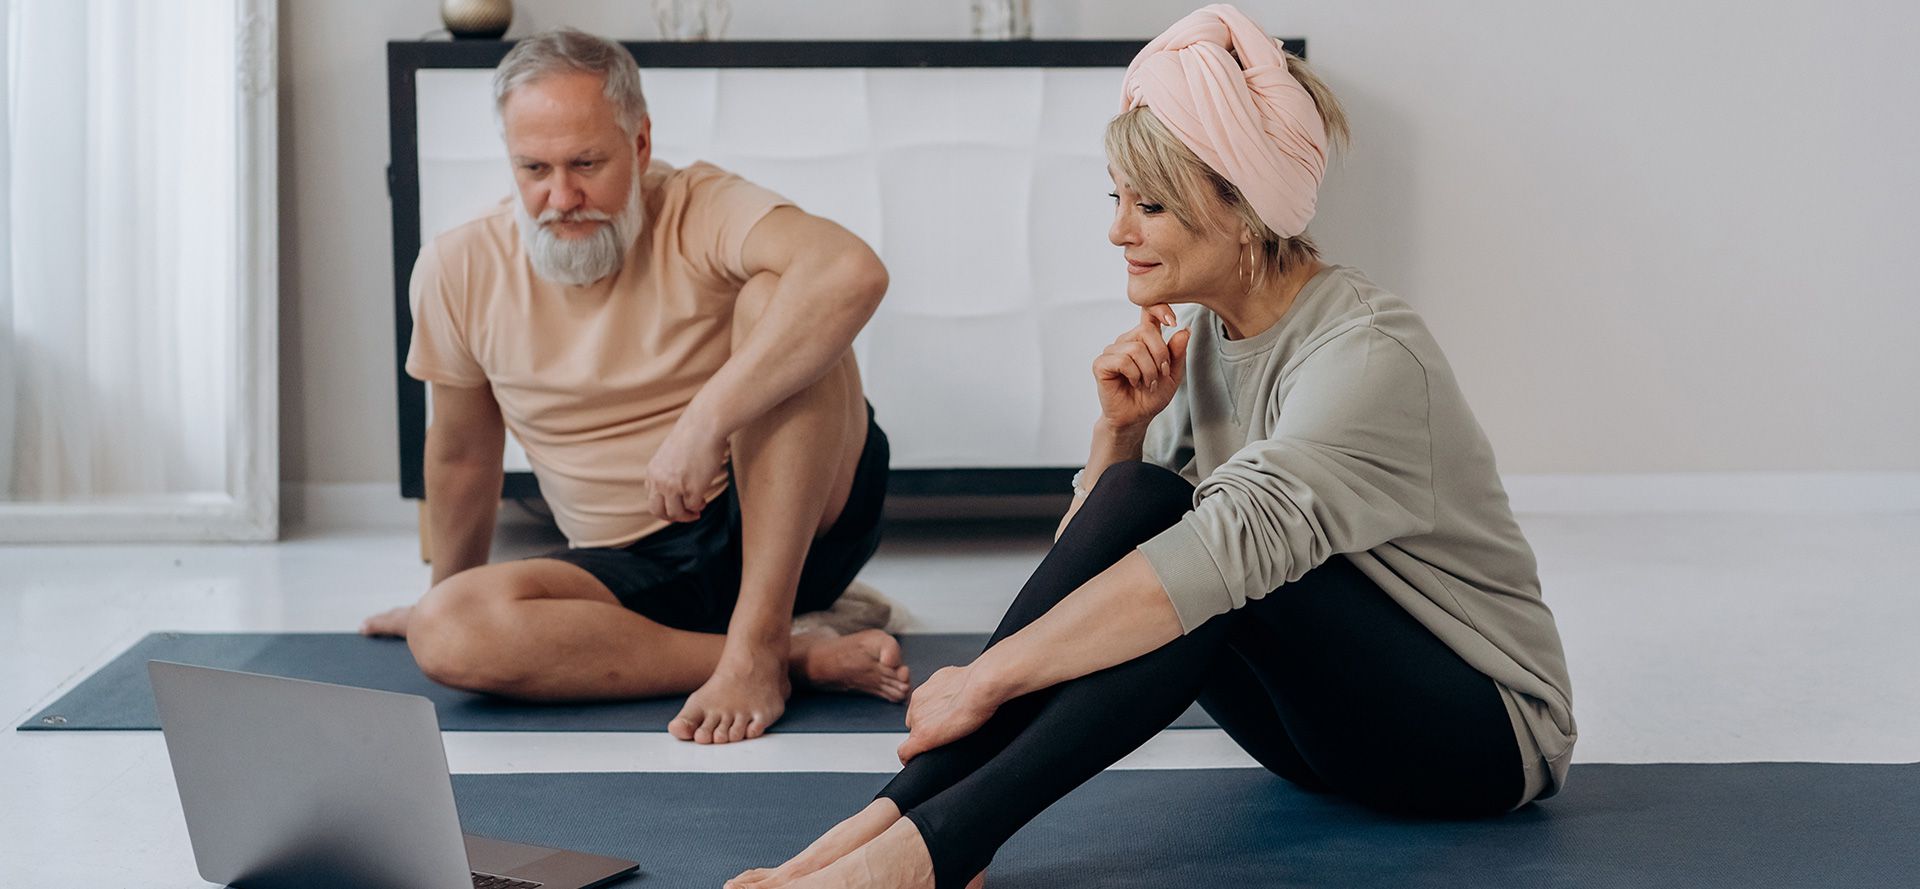 Mature singles on a yoga date.